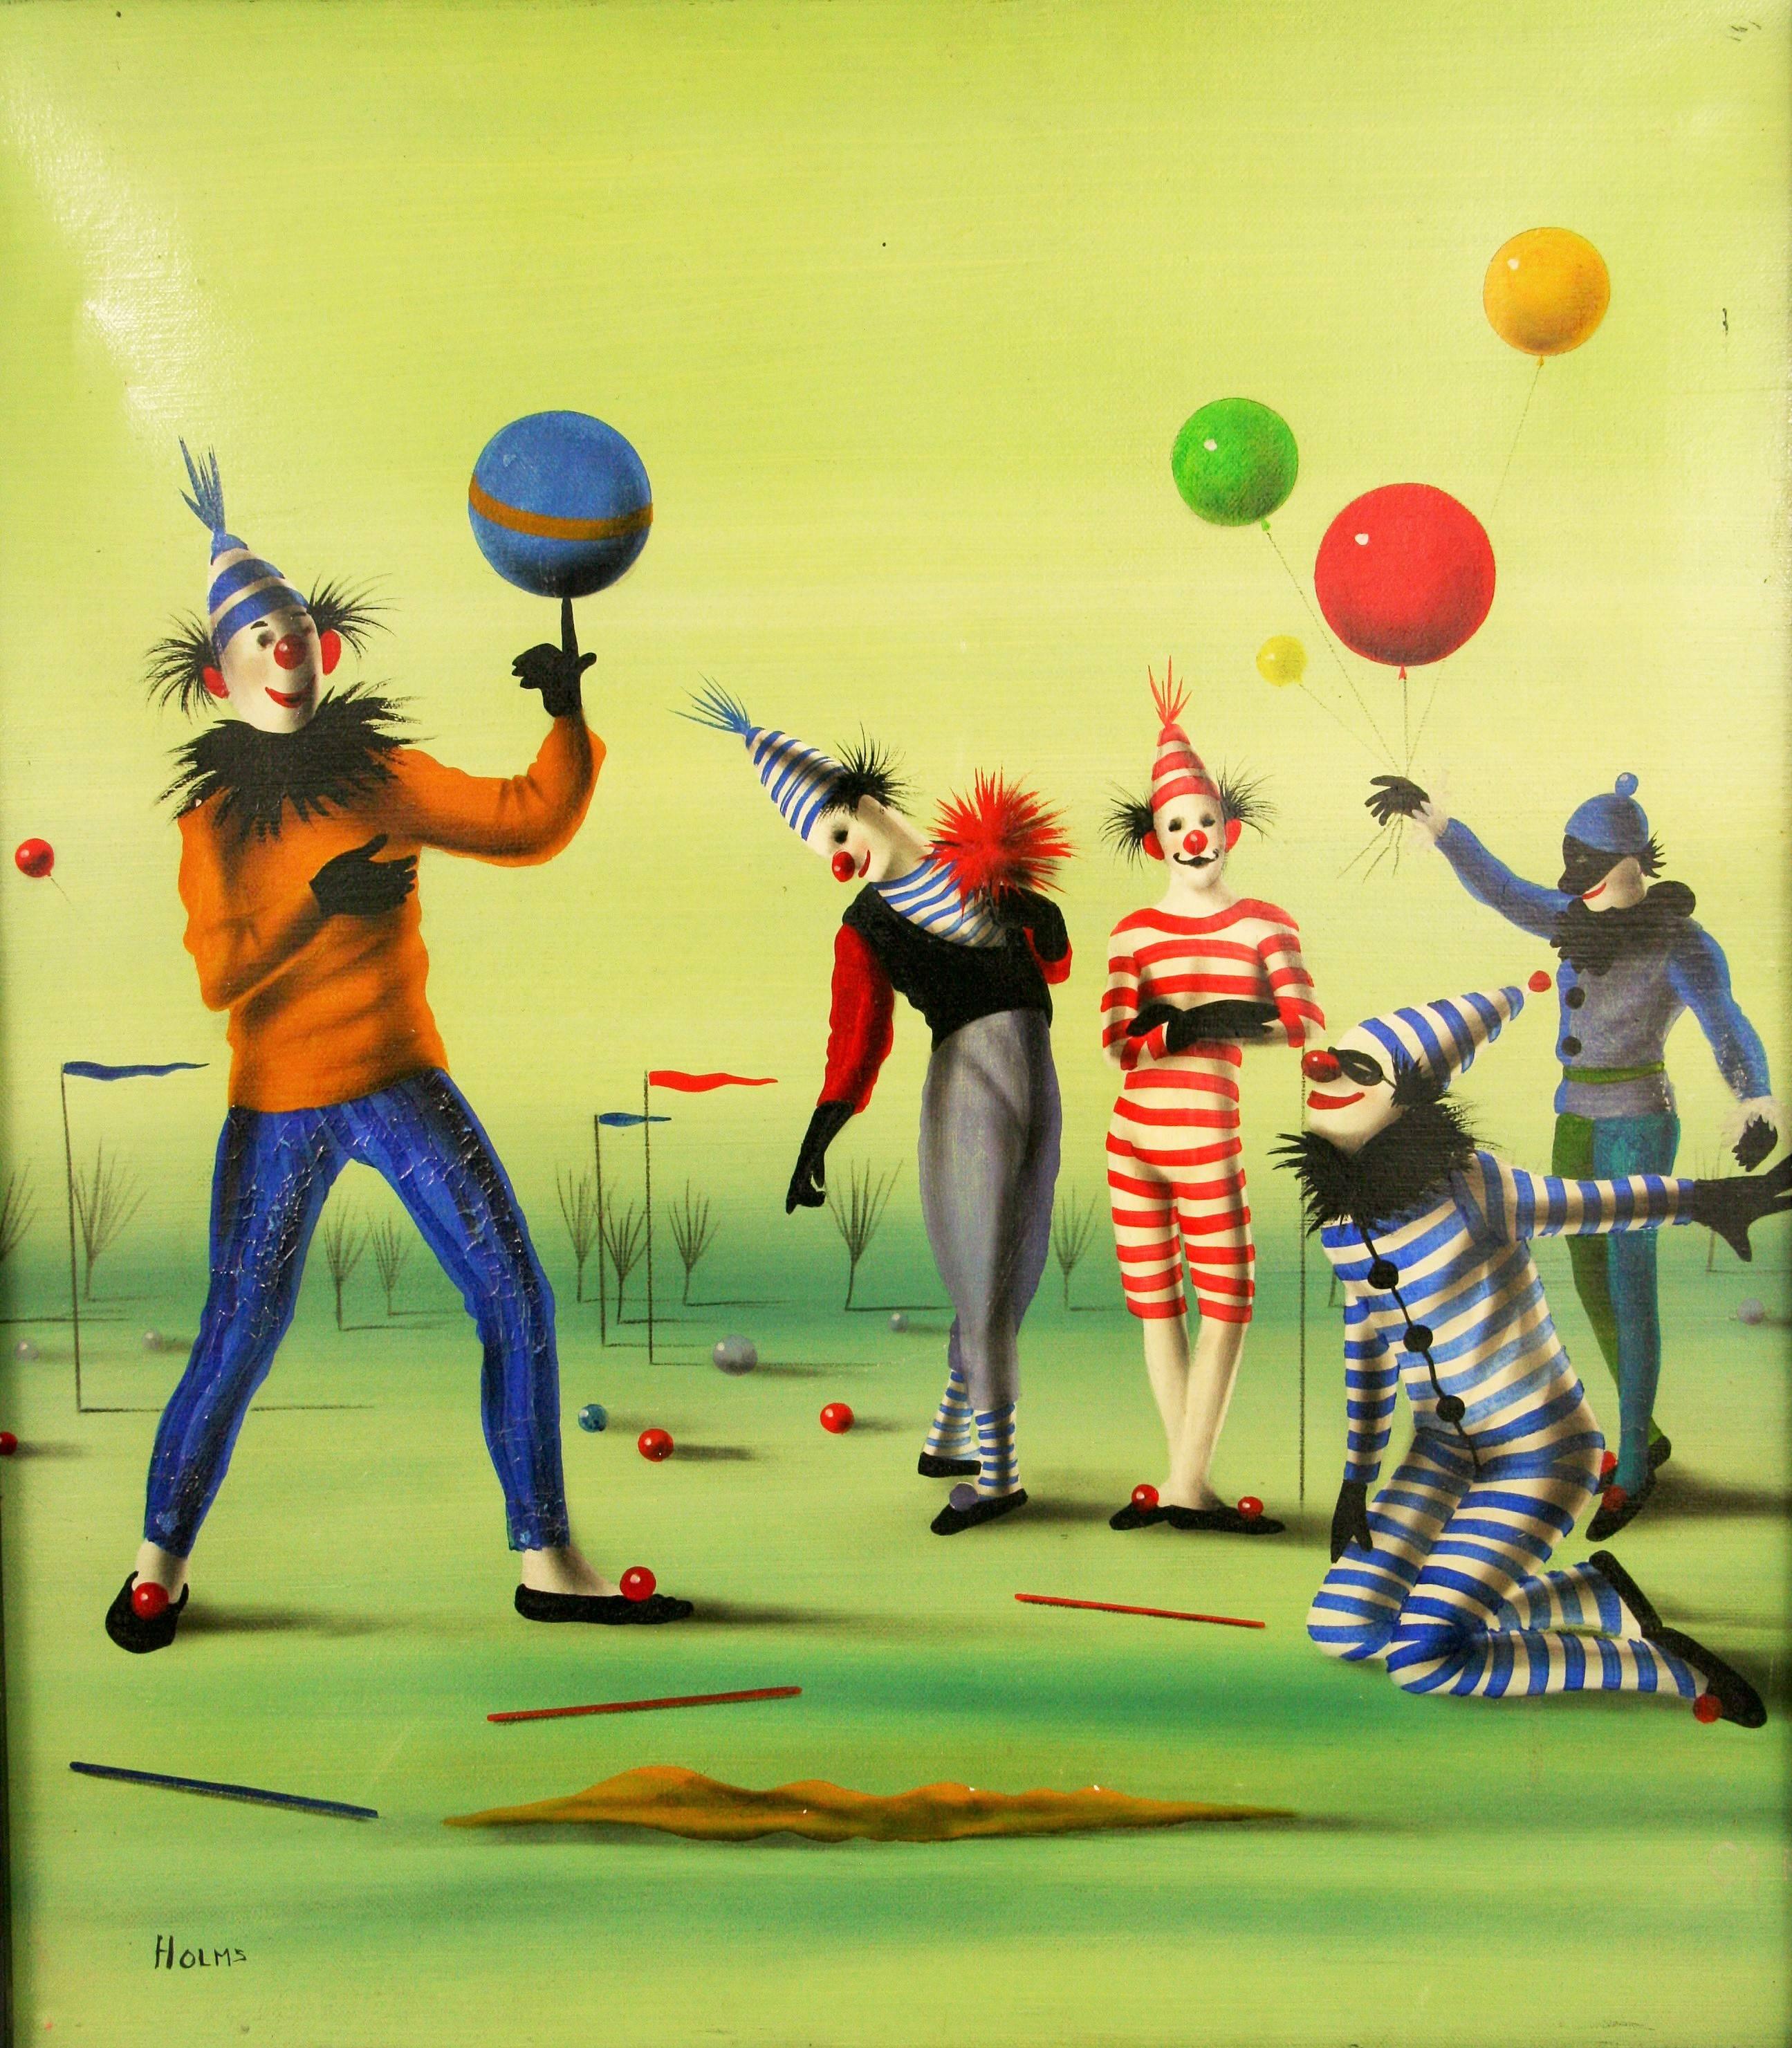 Surreal Circus Clowns - Painting by Holms